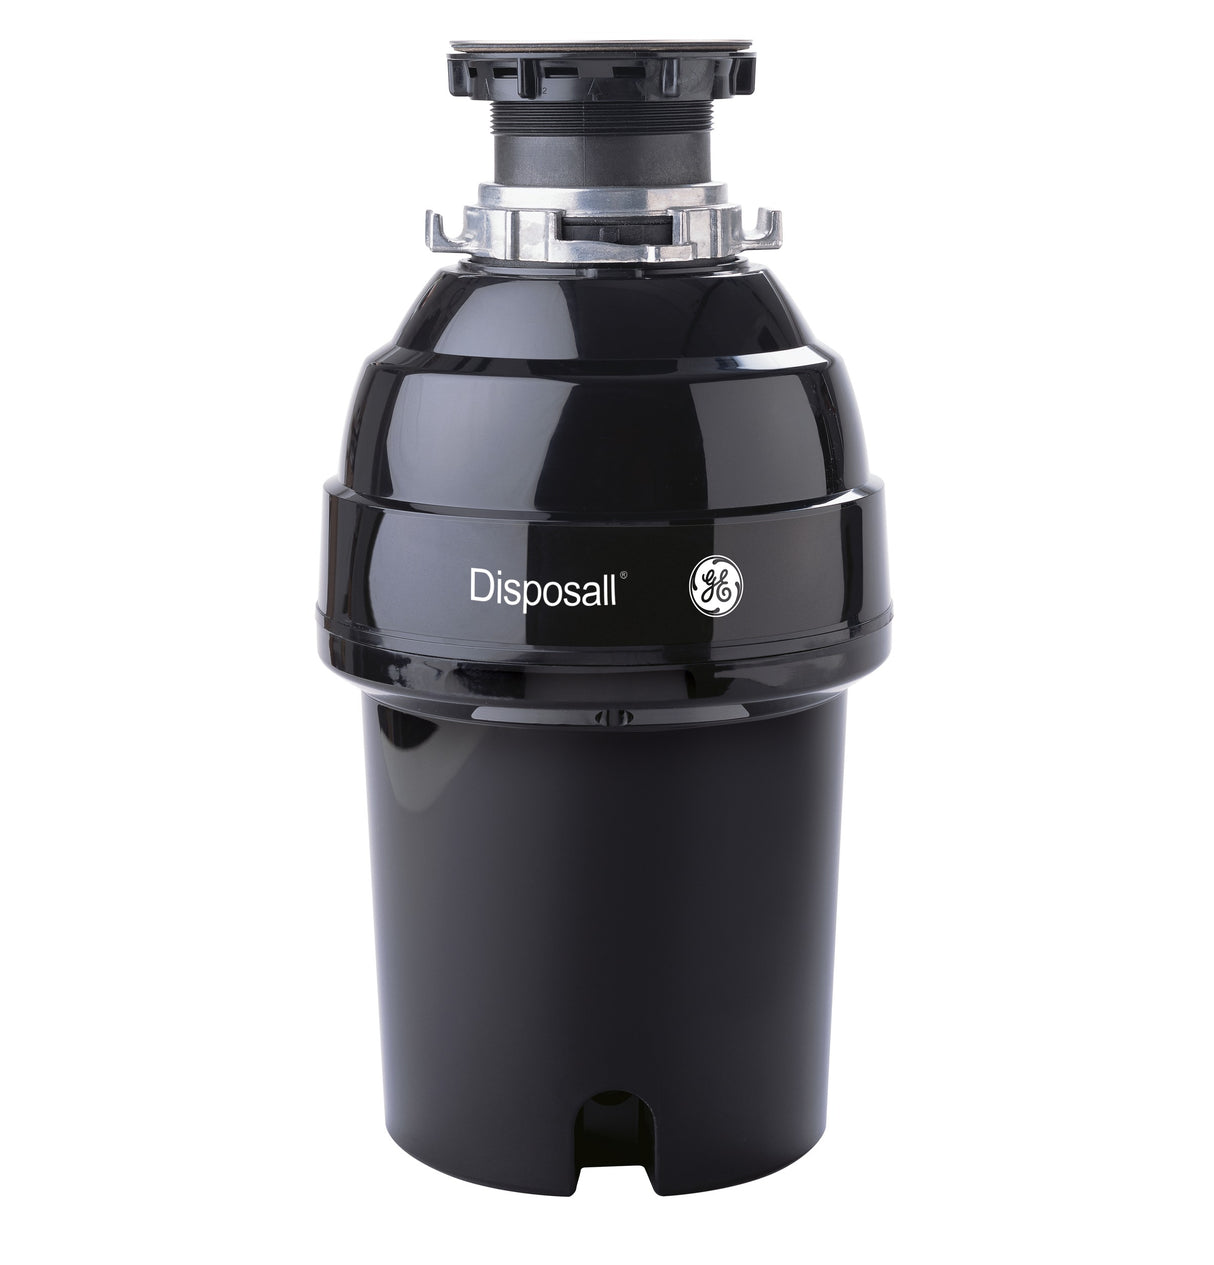 GE DISPOSALL(R) 1 HP Continuous Feed Garbage Disposer Non-Corded - (GFC1020N)